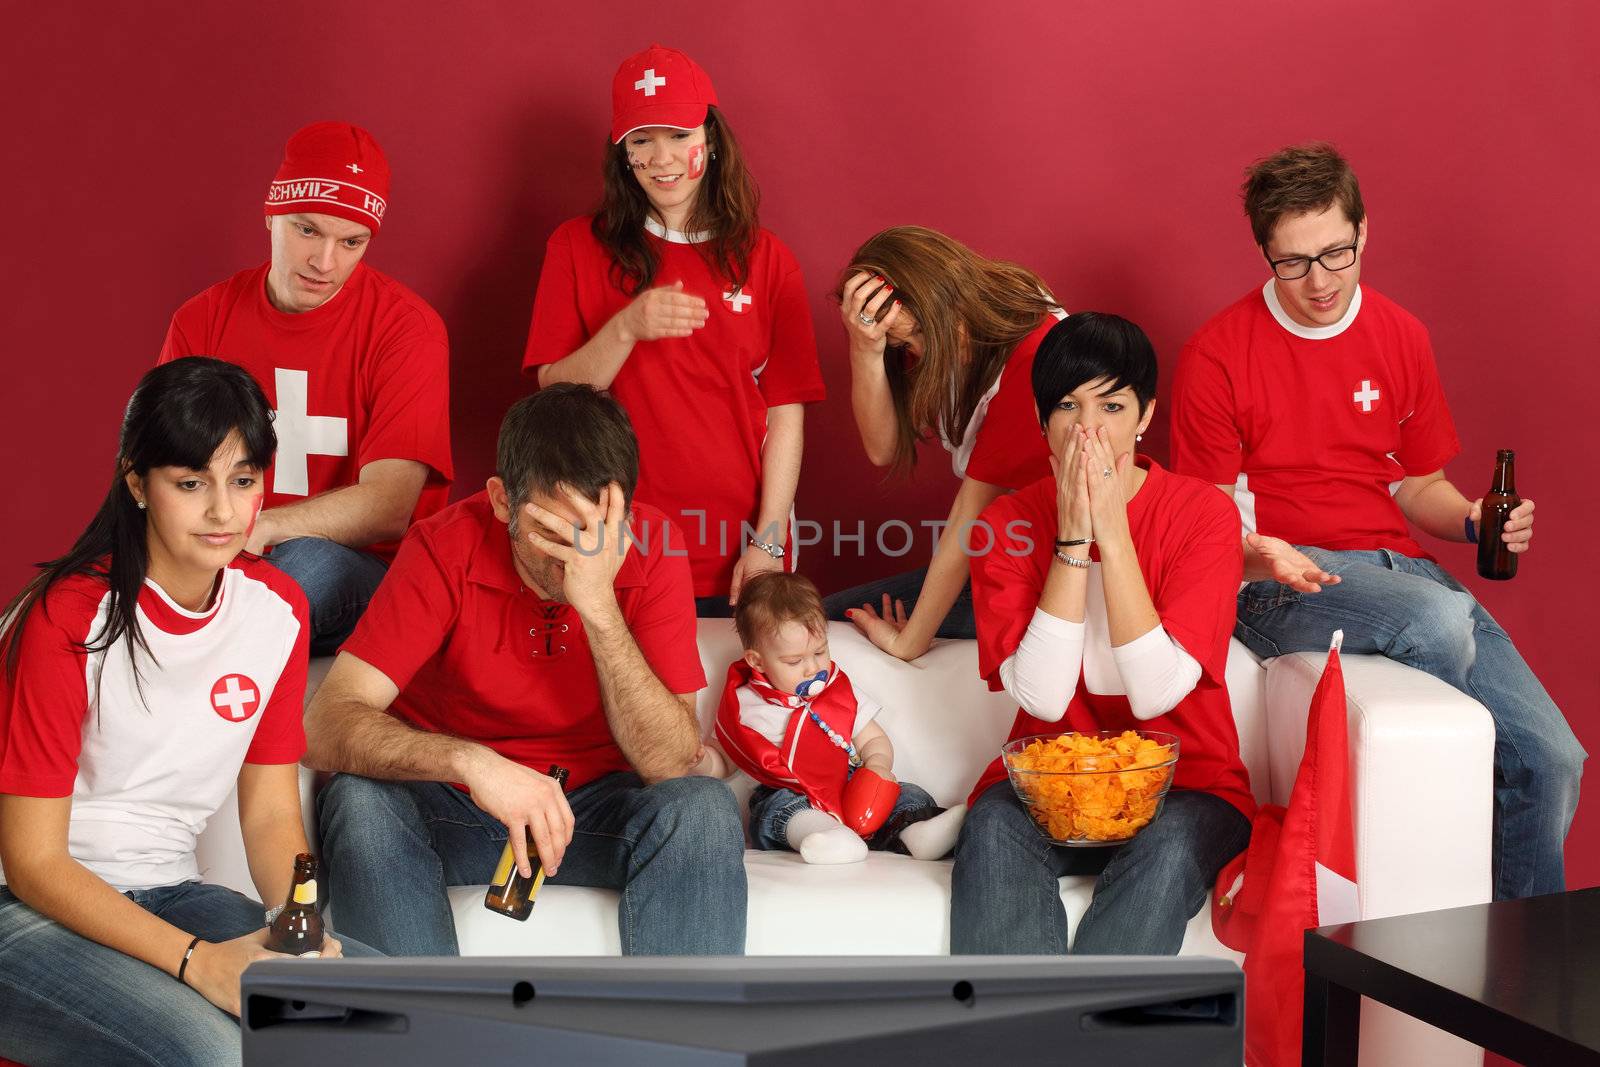 Photo of Swiss sports fans watching television and being disappointed with the game.